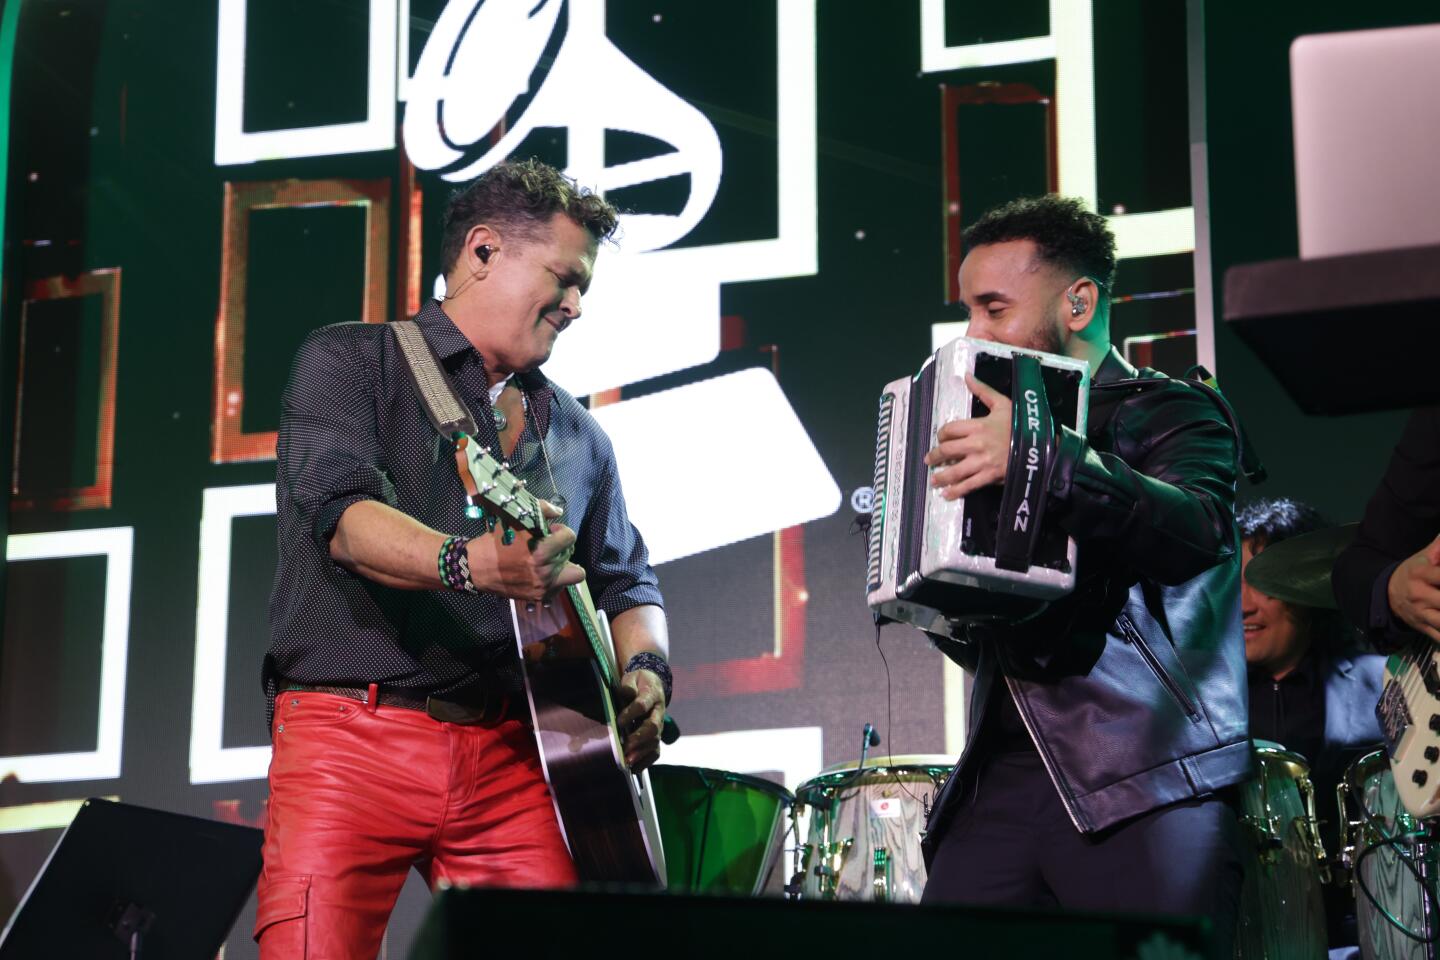 24th Annual Latin Grammy Awards - Best New Artist Showcase and CPI